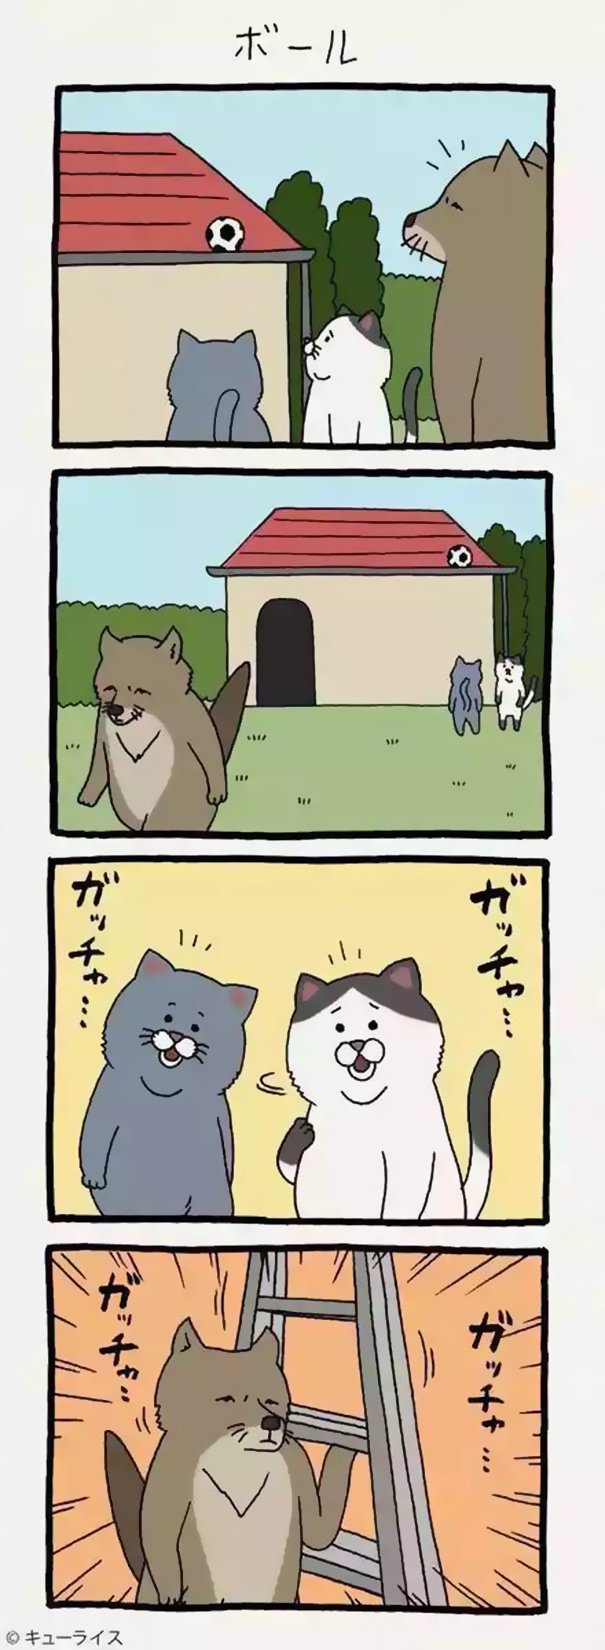 Comics of a dog helping a cat with a ladder